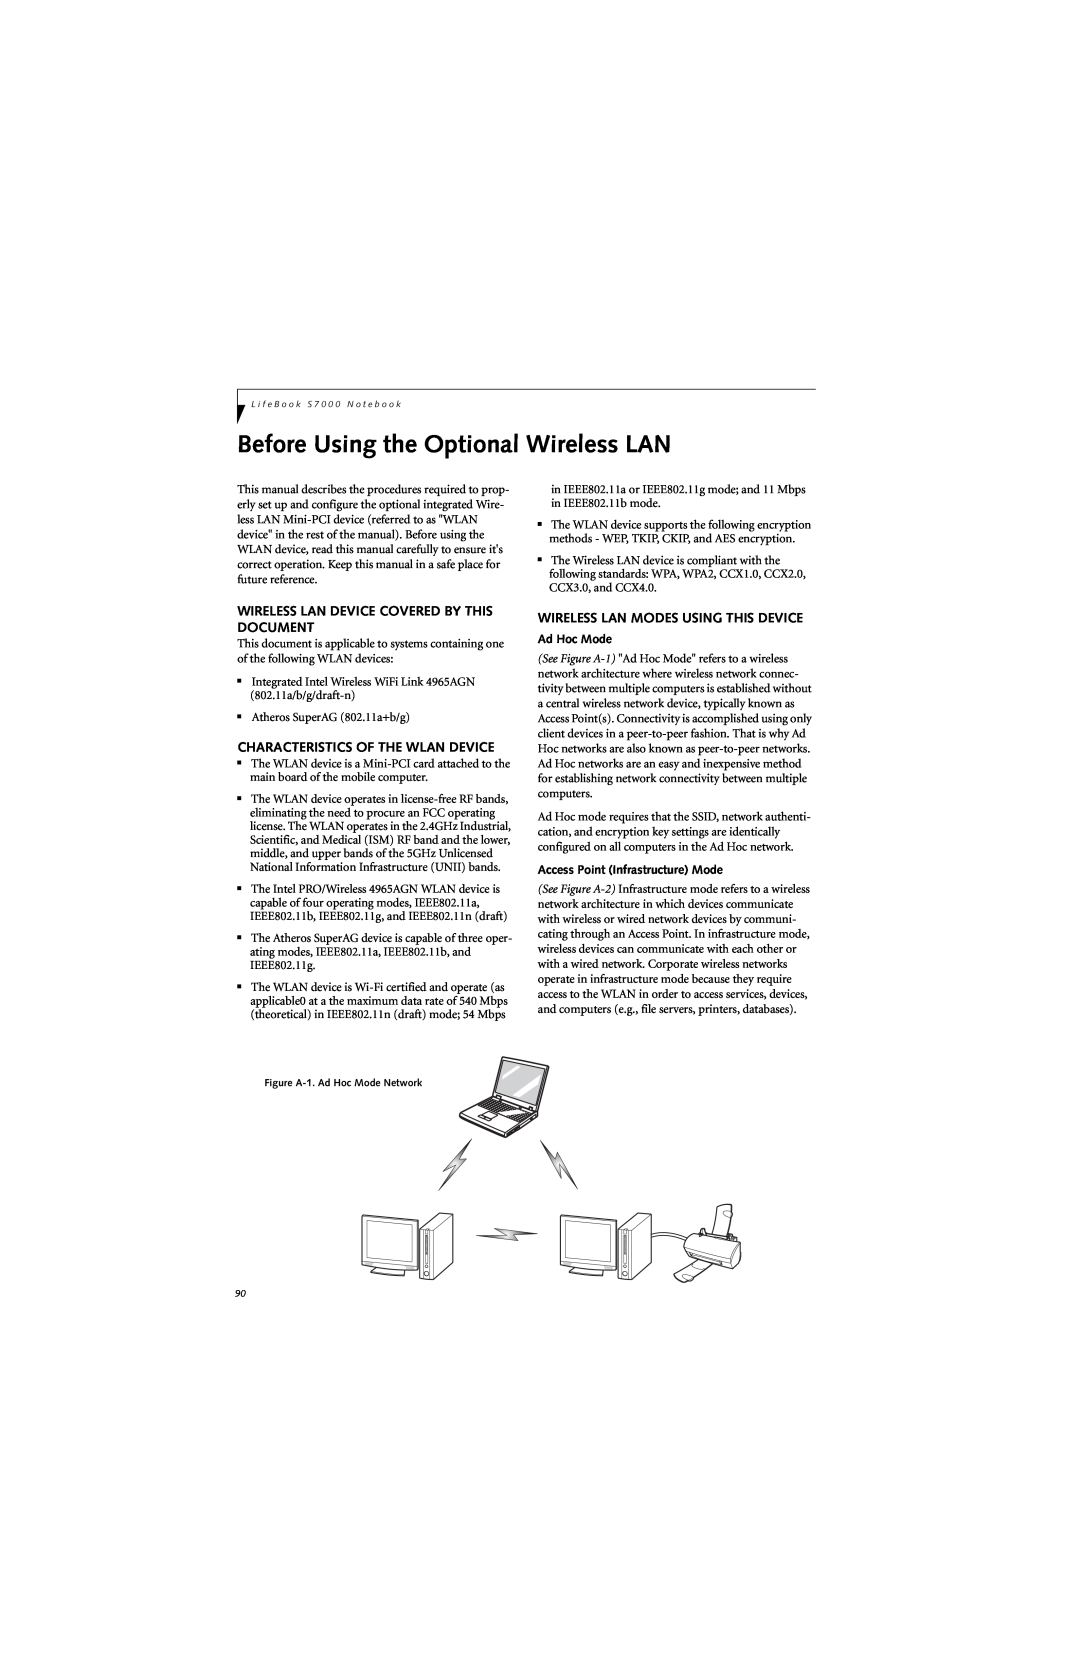 Fujitsu S7210 manual Before Using the Optional Wireless LAN, Wireless Lan Device Covered By This Document, Ad Hoc Mode 